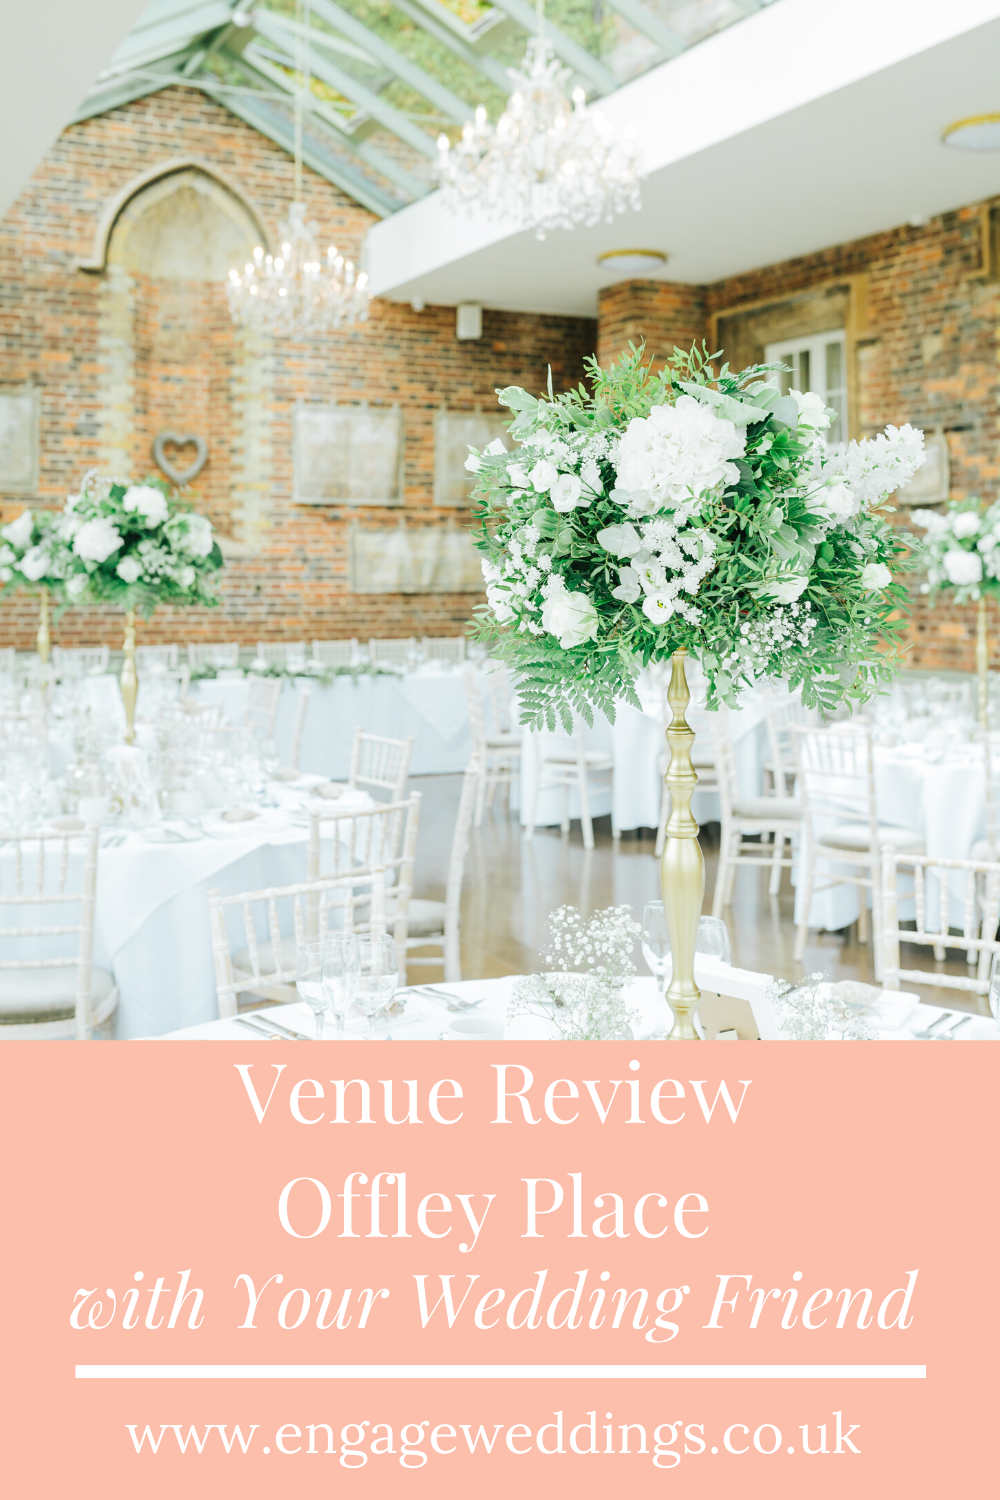 Venue Review_Offley Place_engageweddings.co.uk